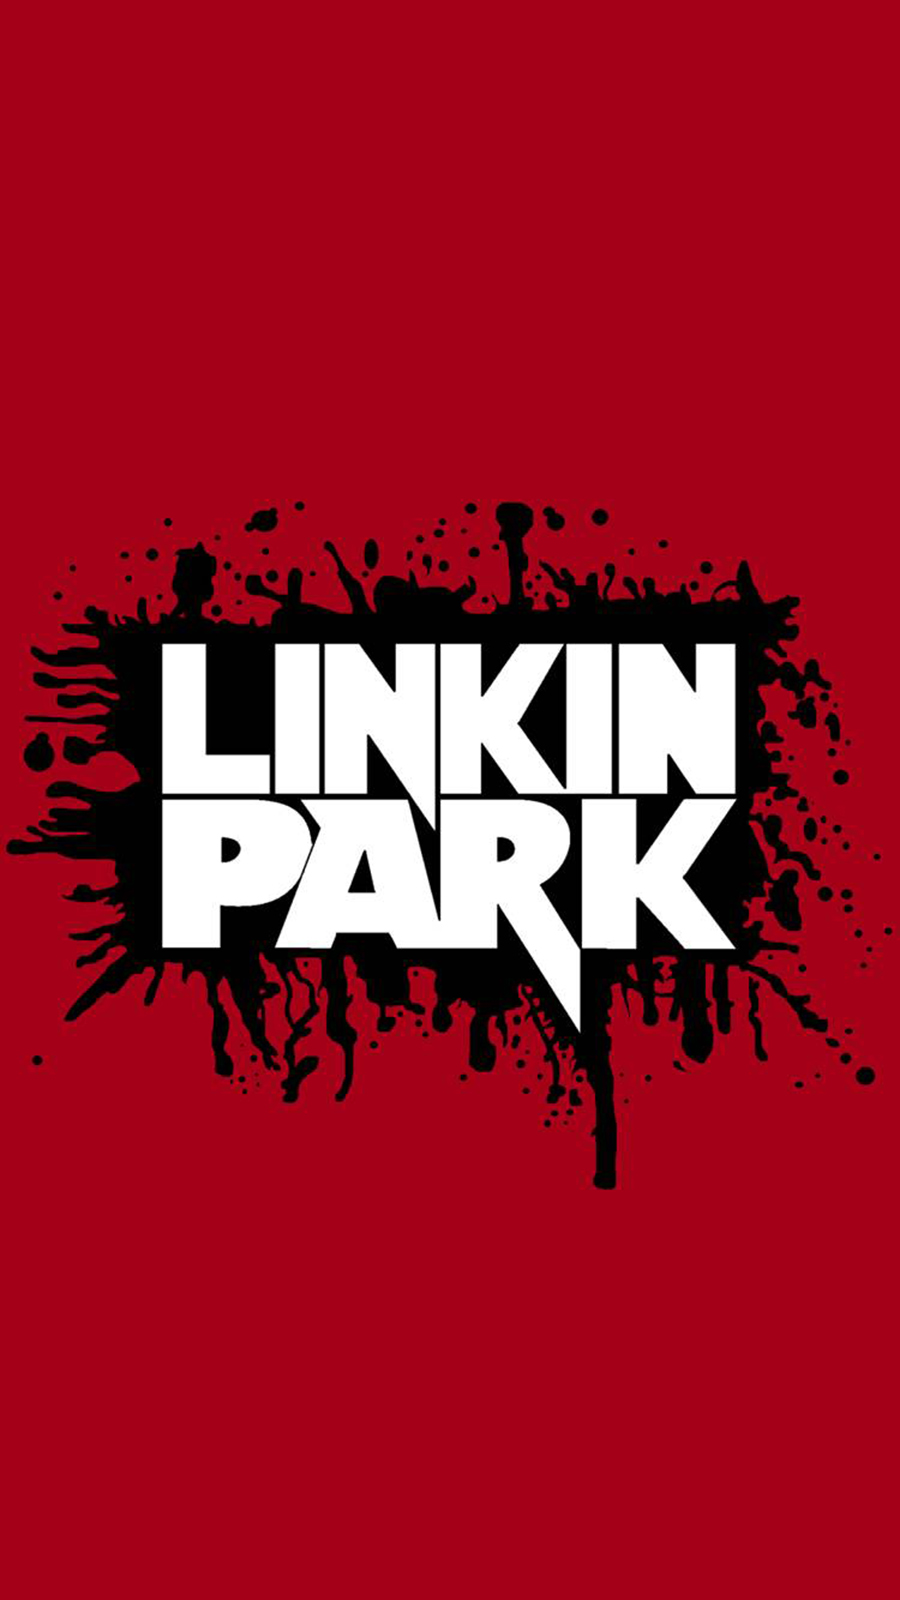 Linkin Park Full HD Wallpapers Now Download